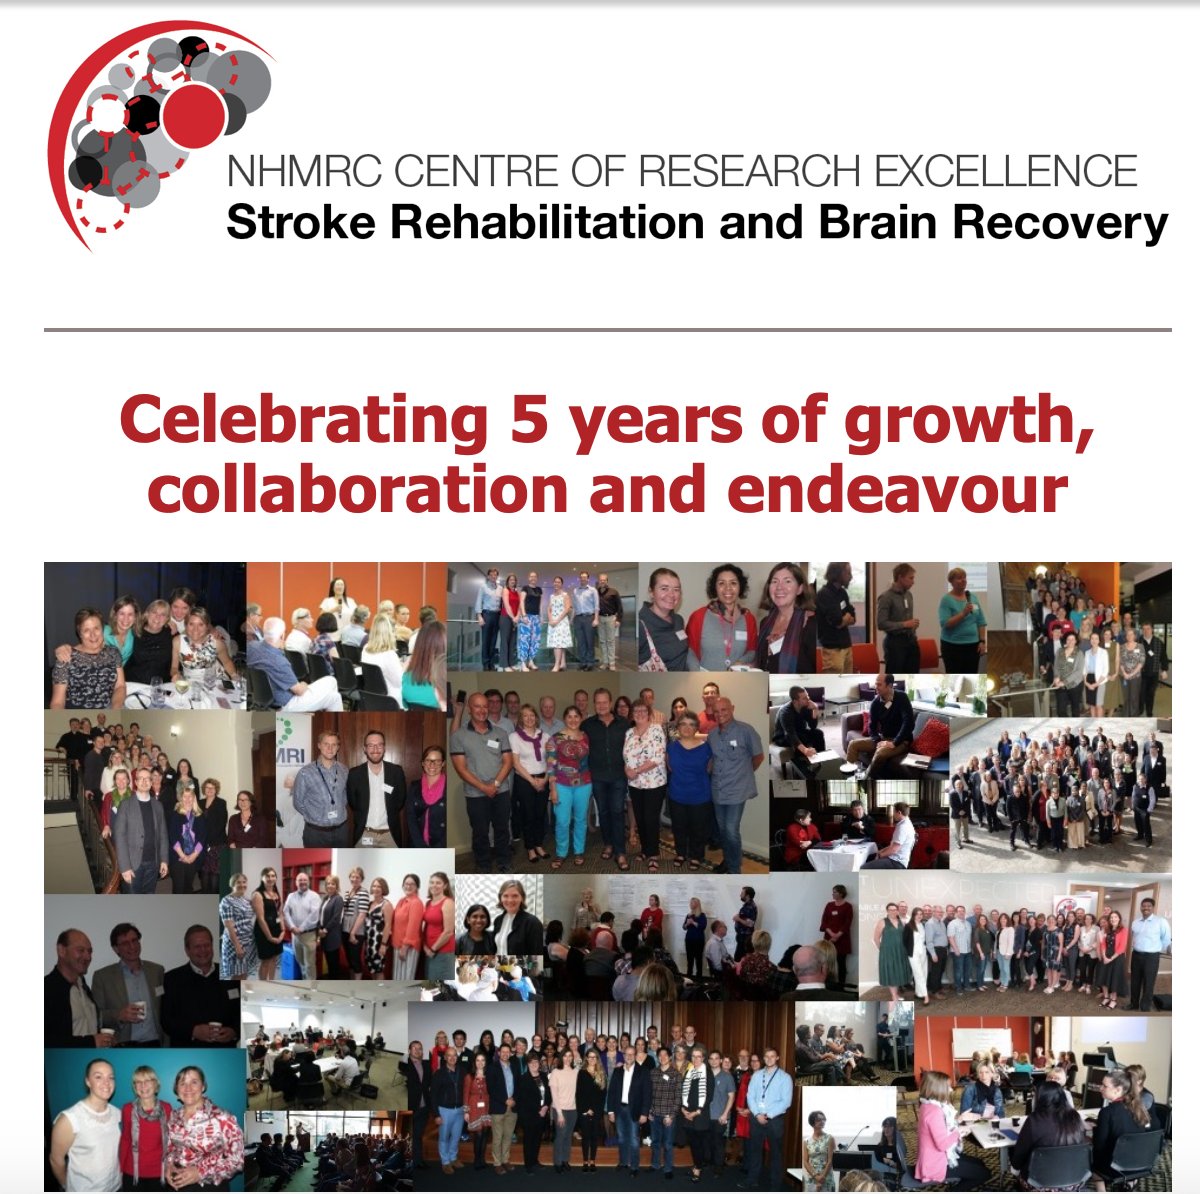 The first CRE Newsletter of 2021 is out! Check out a summary of our achievements over the past 5 years! A lot of work has been done by our researchers, clinicians and consumers, to improve stroke recovery and survivors' lives. You can access it here bitly.ws/bShx